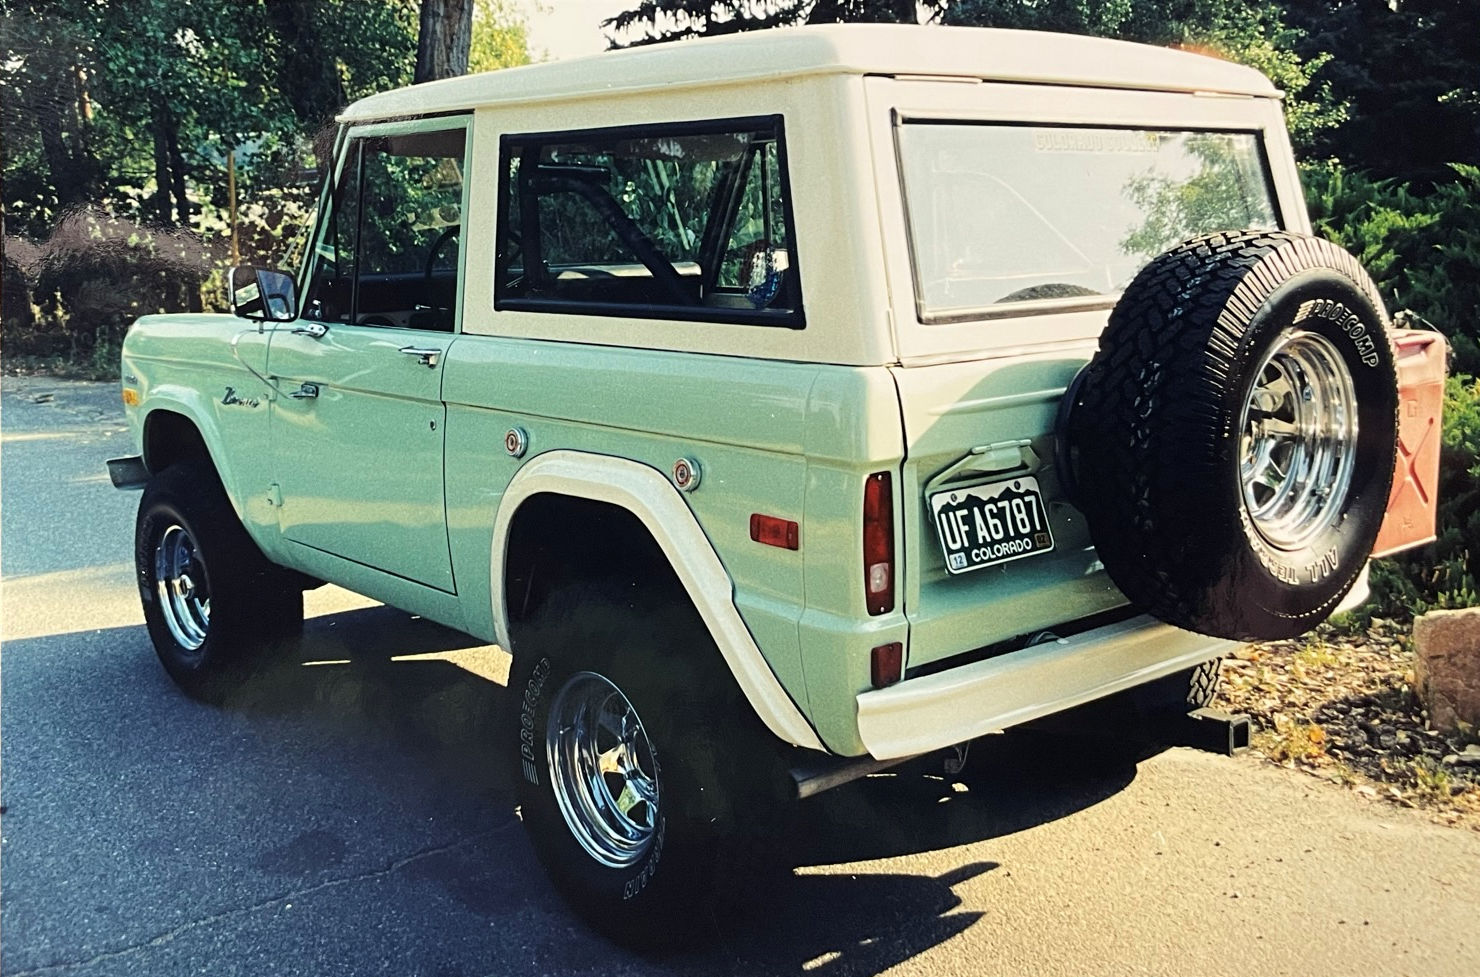 Ford Bronco I wrapped my Badlands in Light Pistachio Green IMG_4967.JPEG